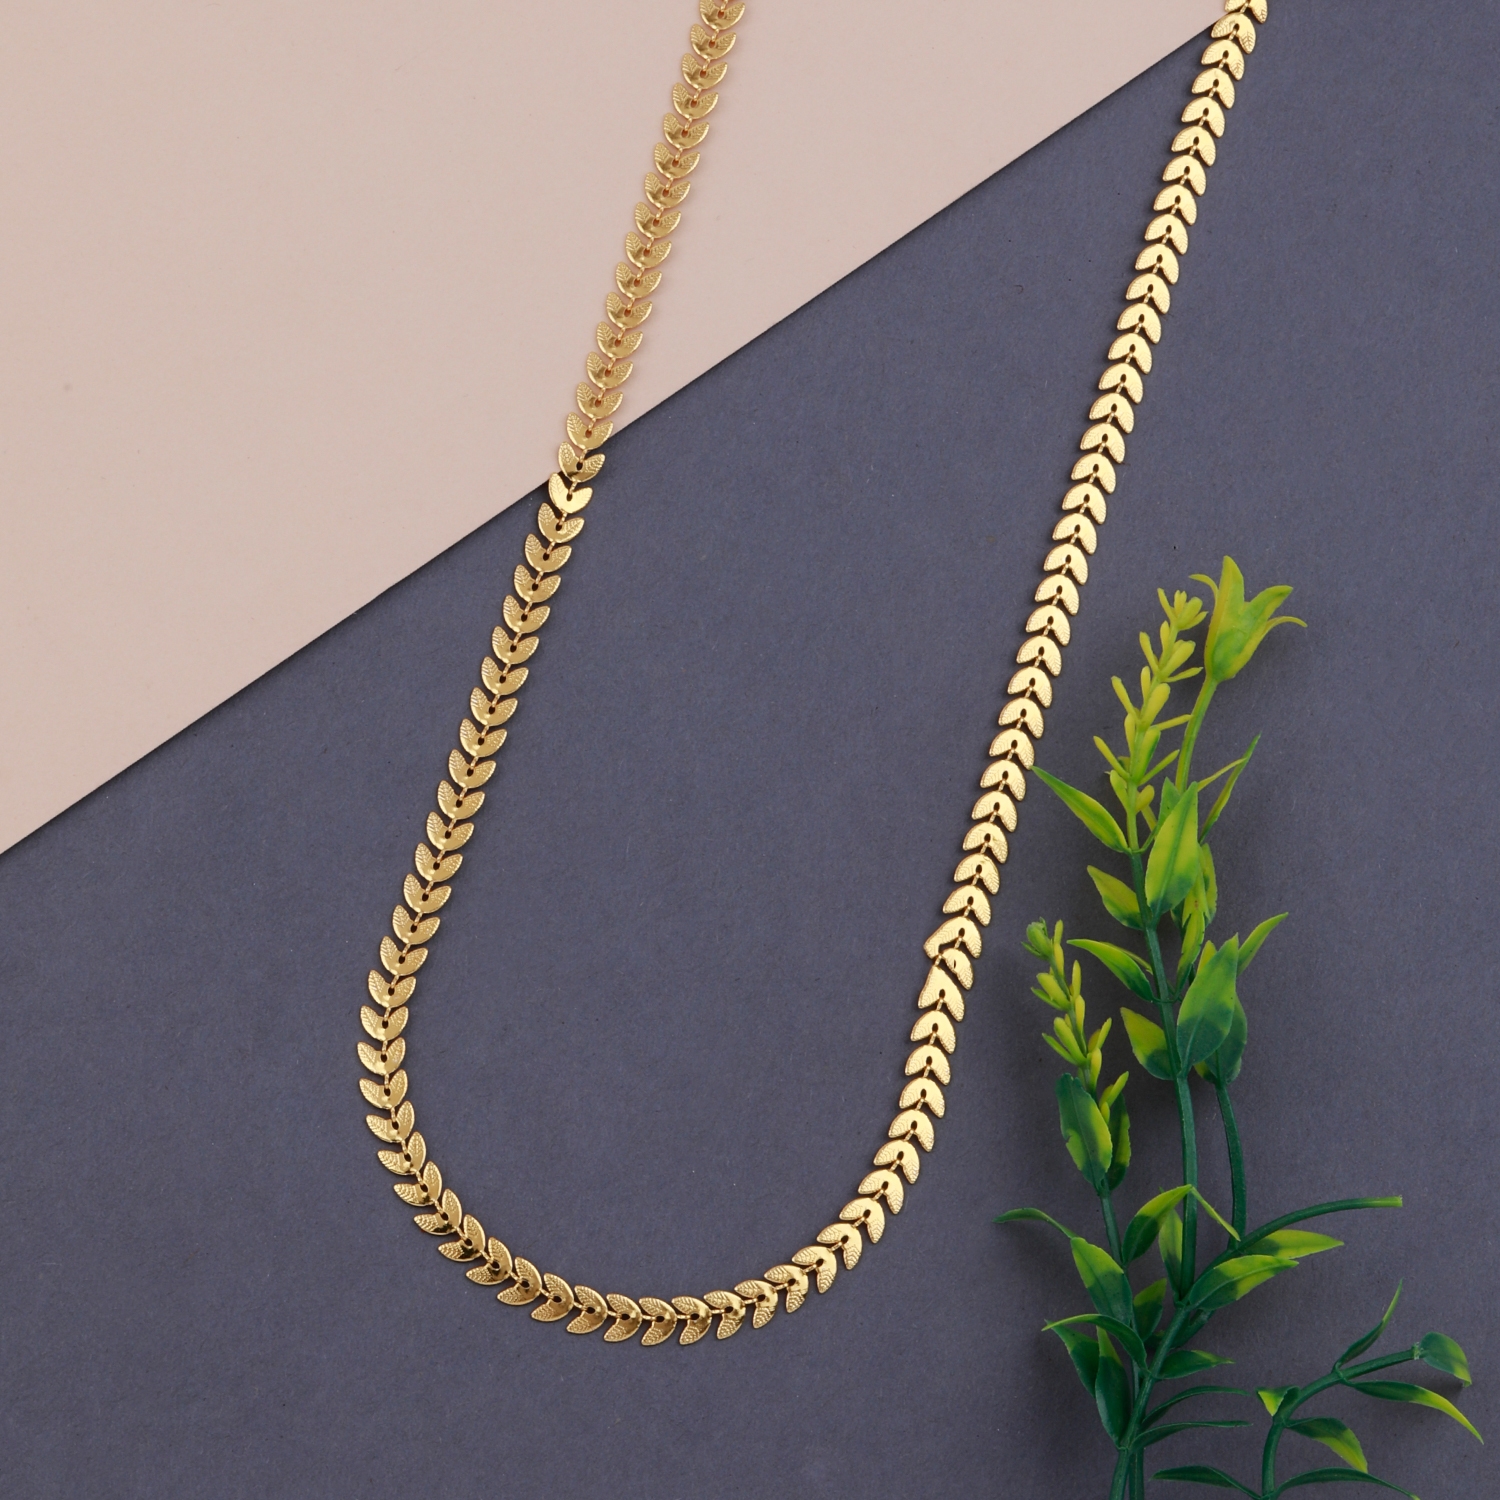 Paola Jewels | Paola Delicated Stylish Gold Chain For Women Girls 